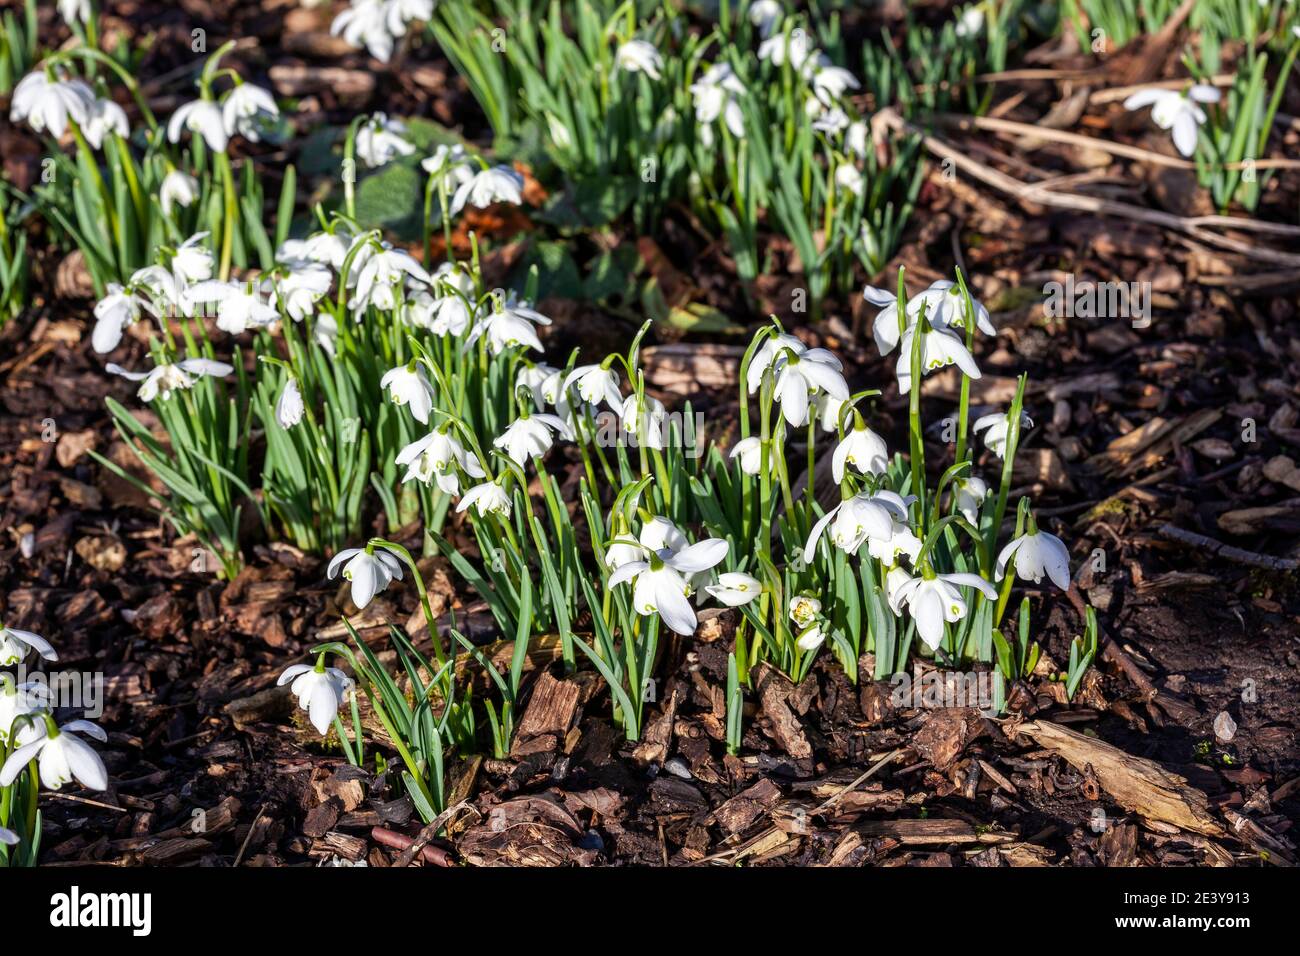 Snowdrops (galanthus) Flore Pleno an  early winter spring flowering  bulbous plant with a white springtime double flower which opens in January and Fe Stock Photo